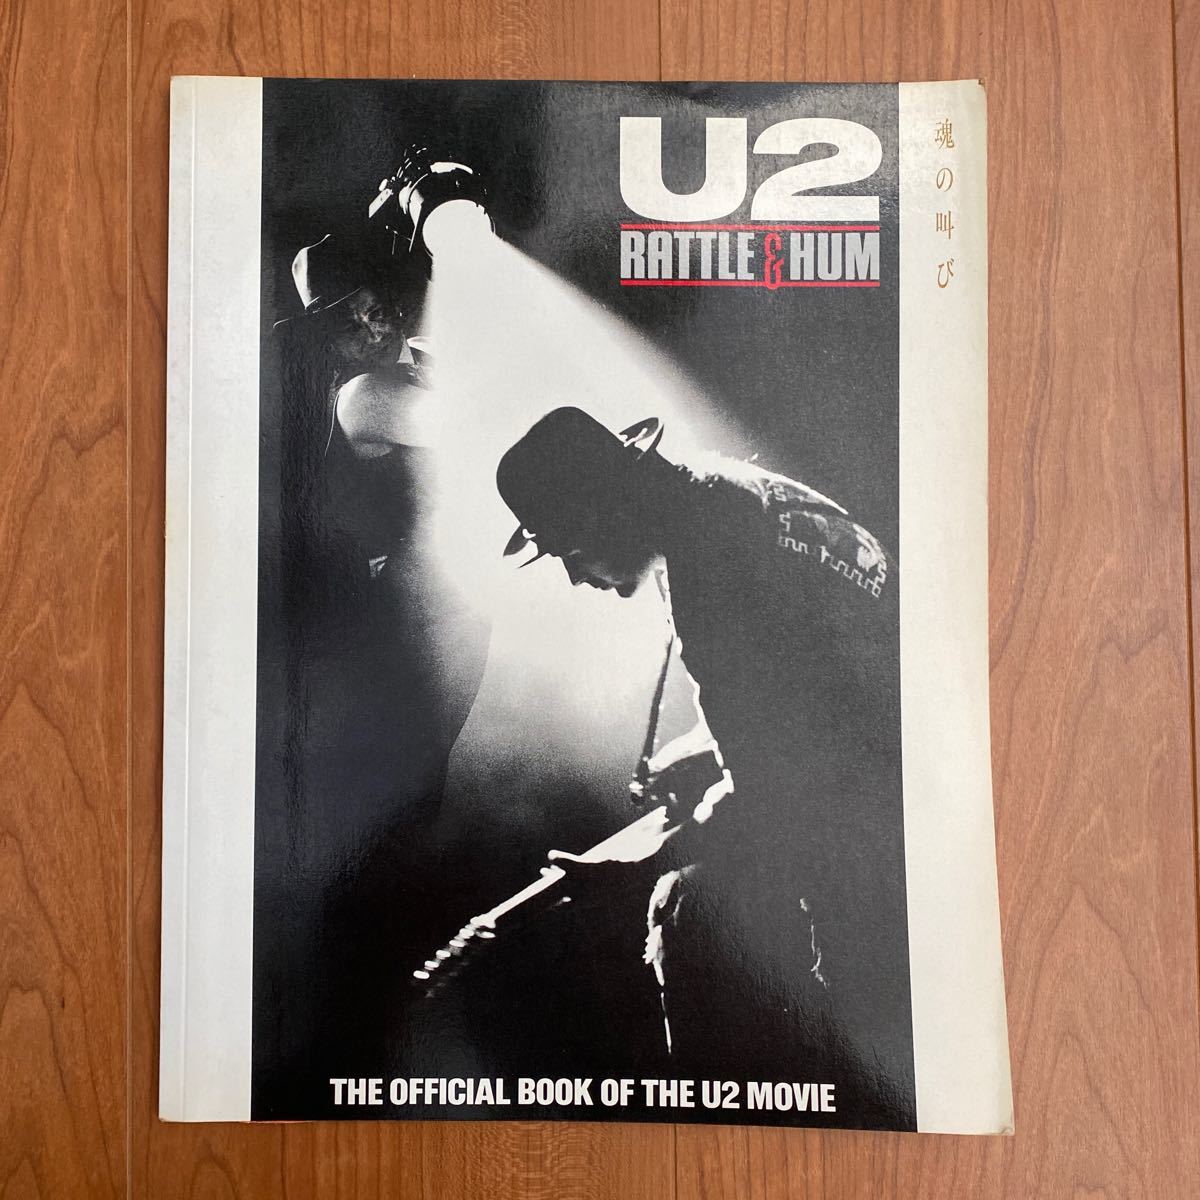 book@U2 movie RATTLE & HUM soul. ..THE OFFICIAL BOOK of The U2 Movie photoalbum disco graph .-1988 year lito- music music magazine 